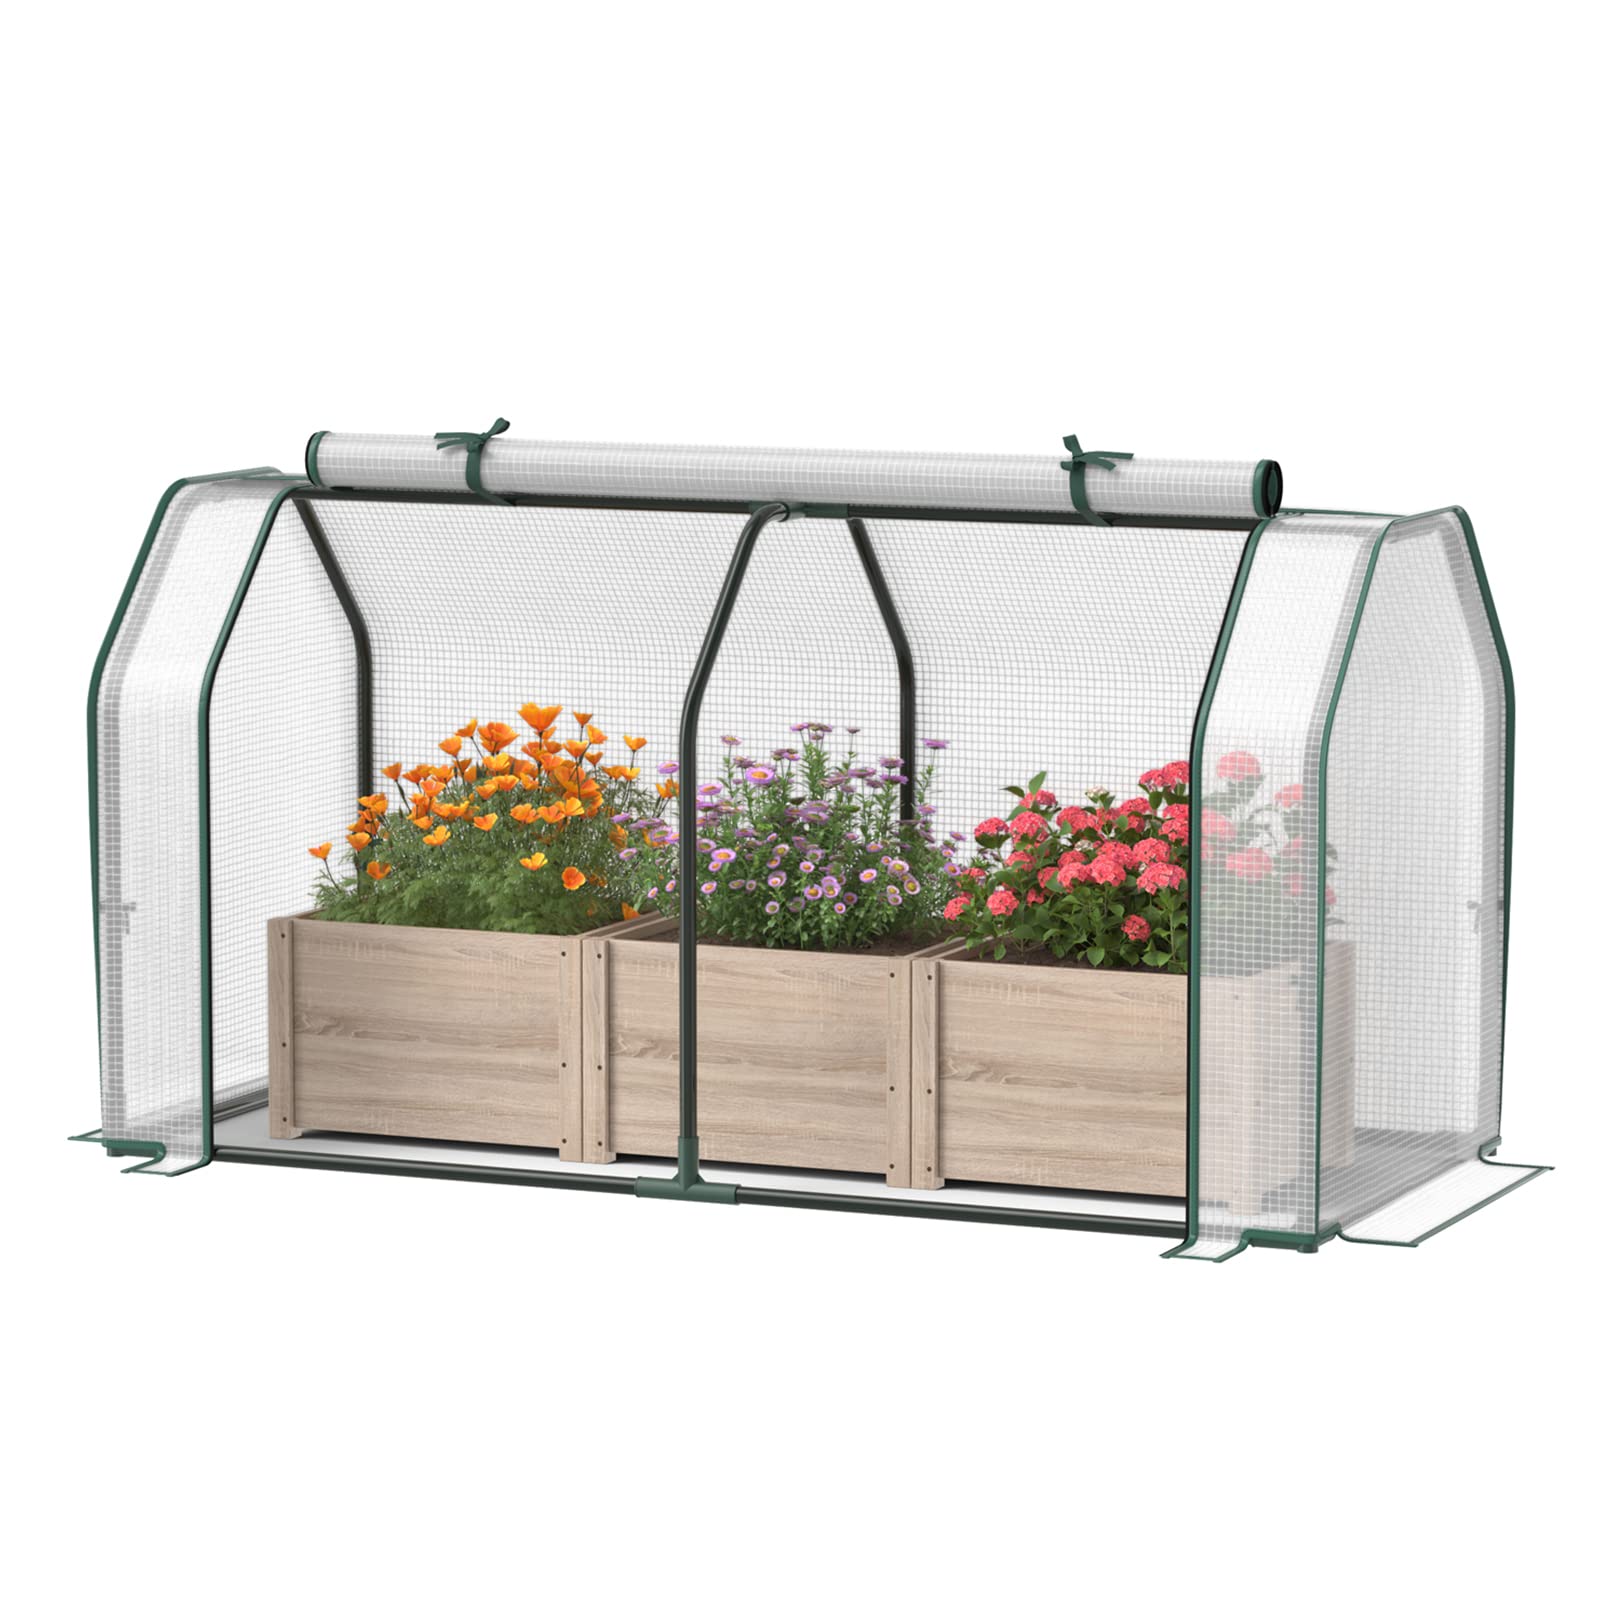 Giantex Mini Portable Greenhouse - for Raised Garden Bed, 47.5”x 21.5”x 24” Green House with PE Cover Zipper Door